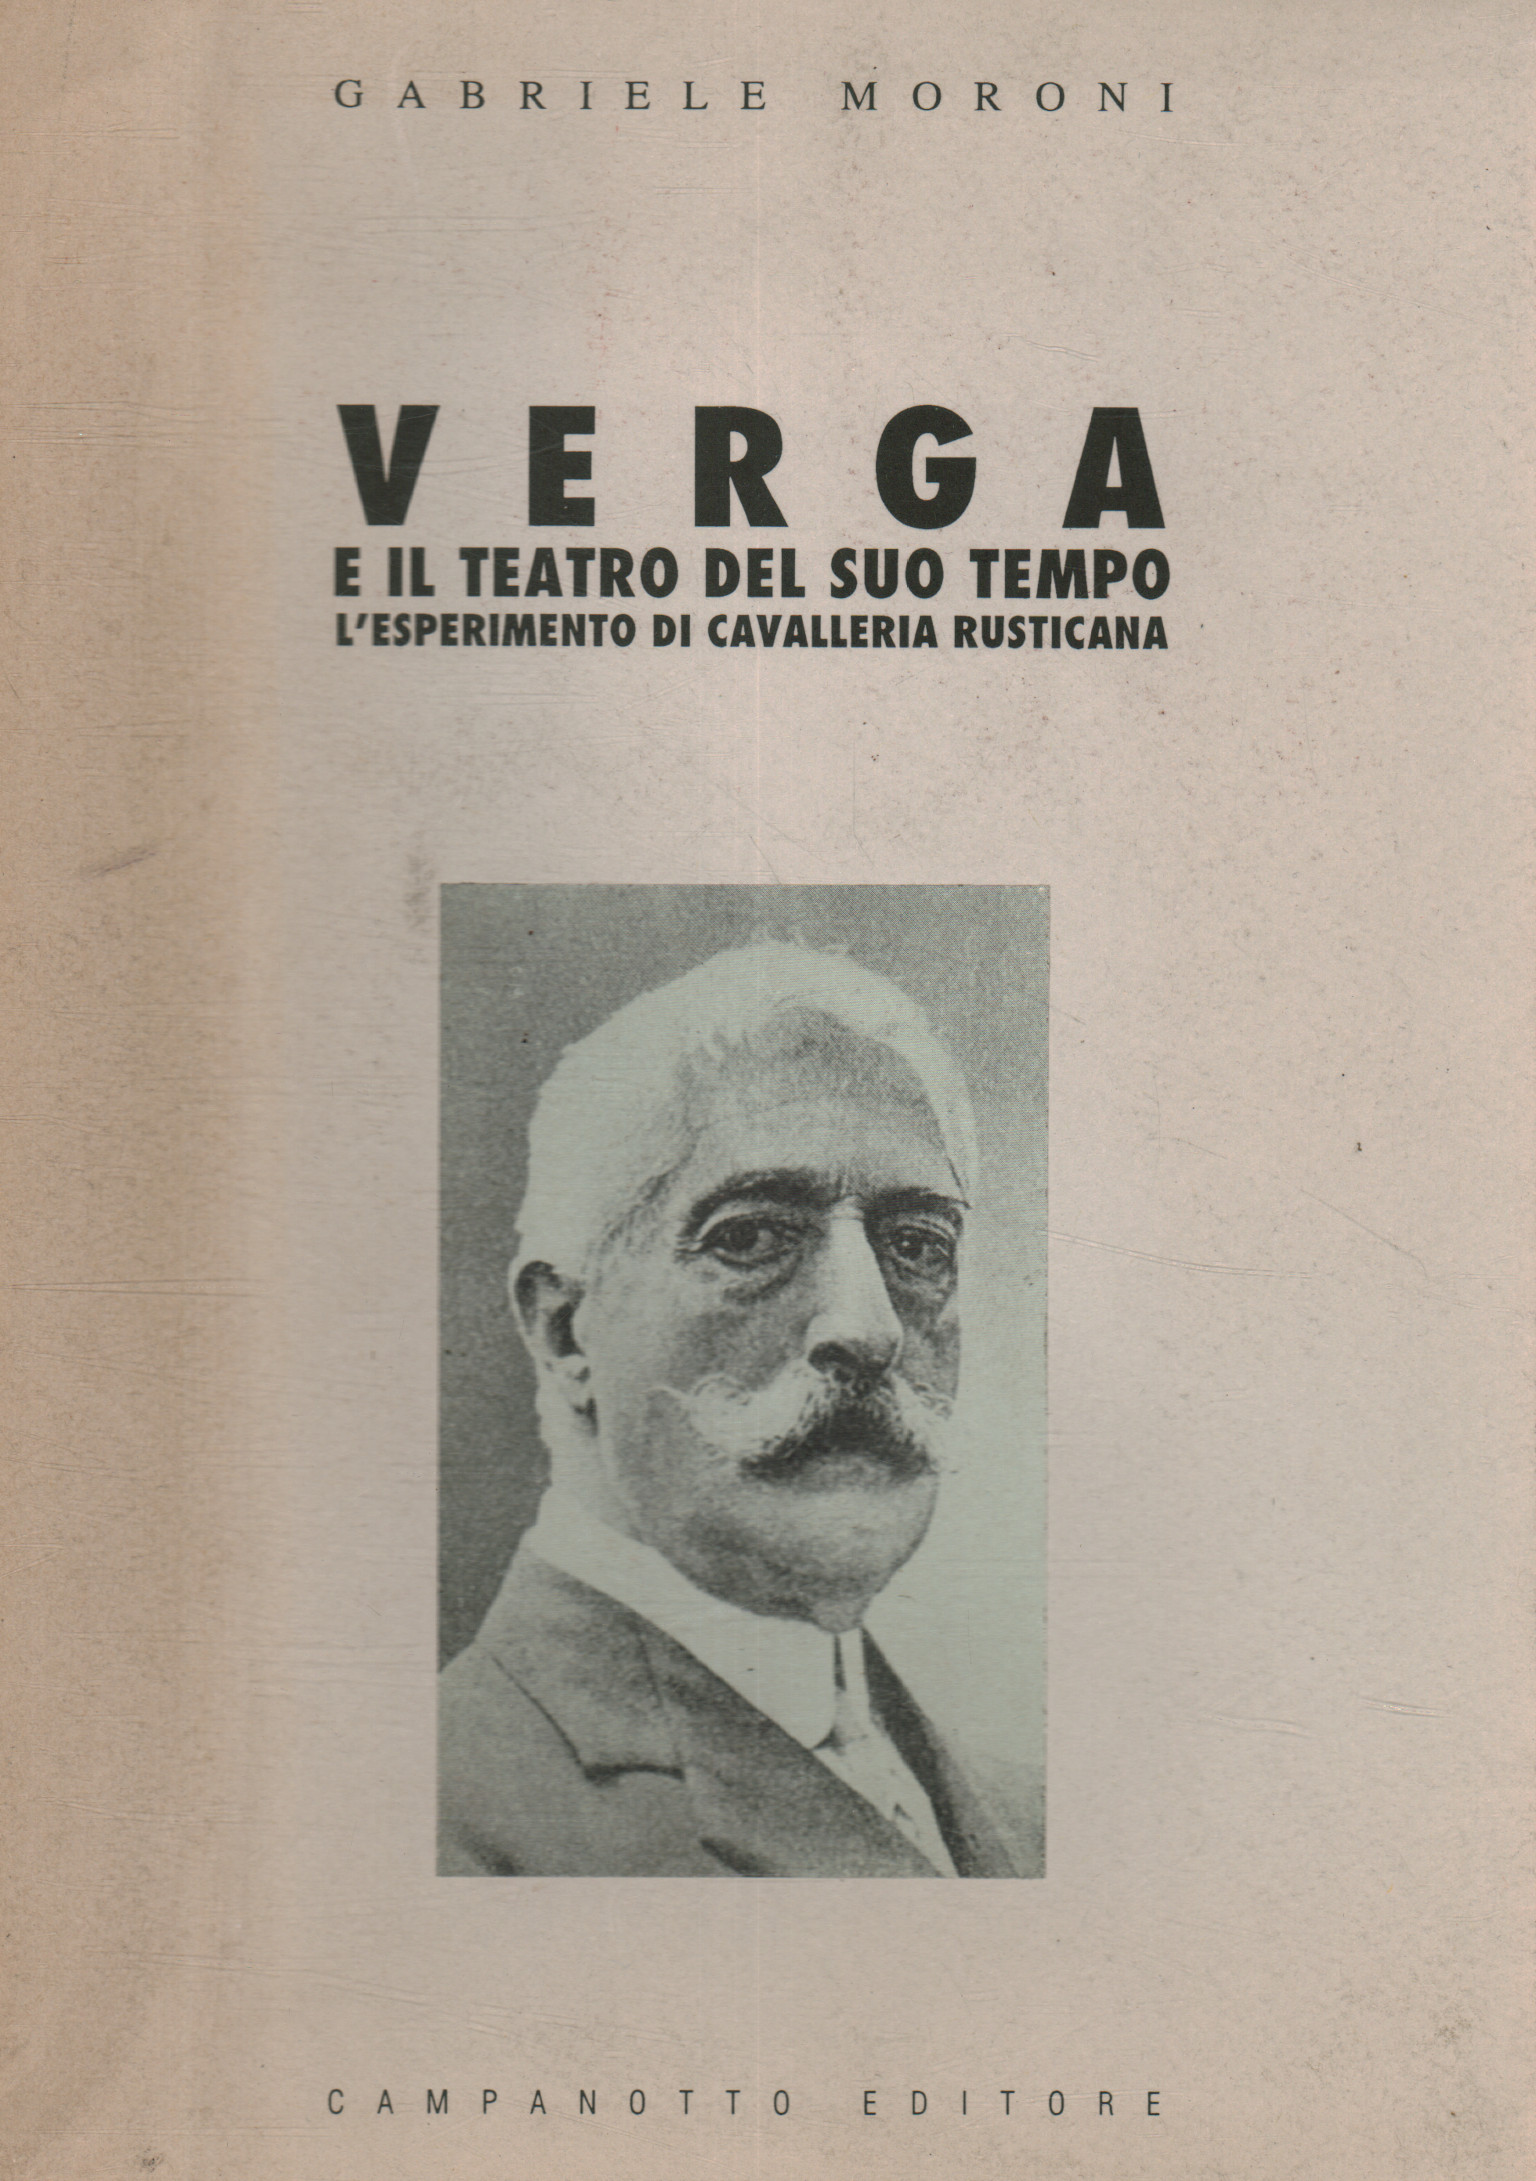 Verga and the theater of his time